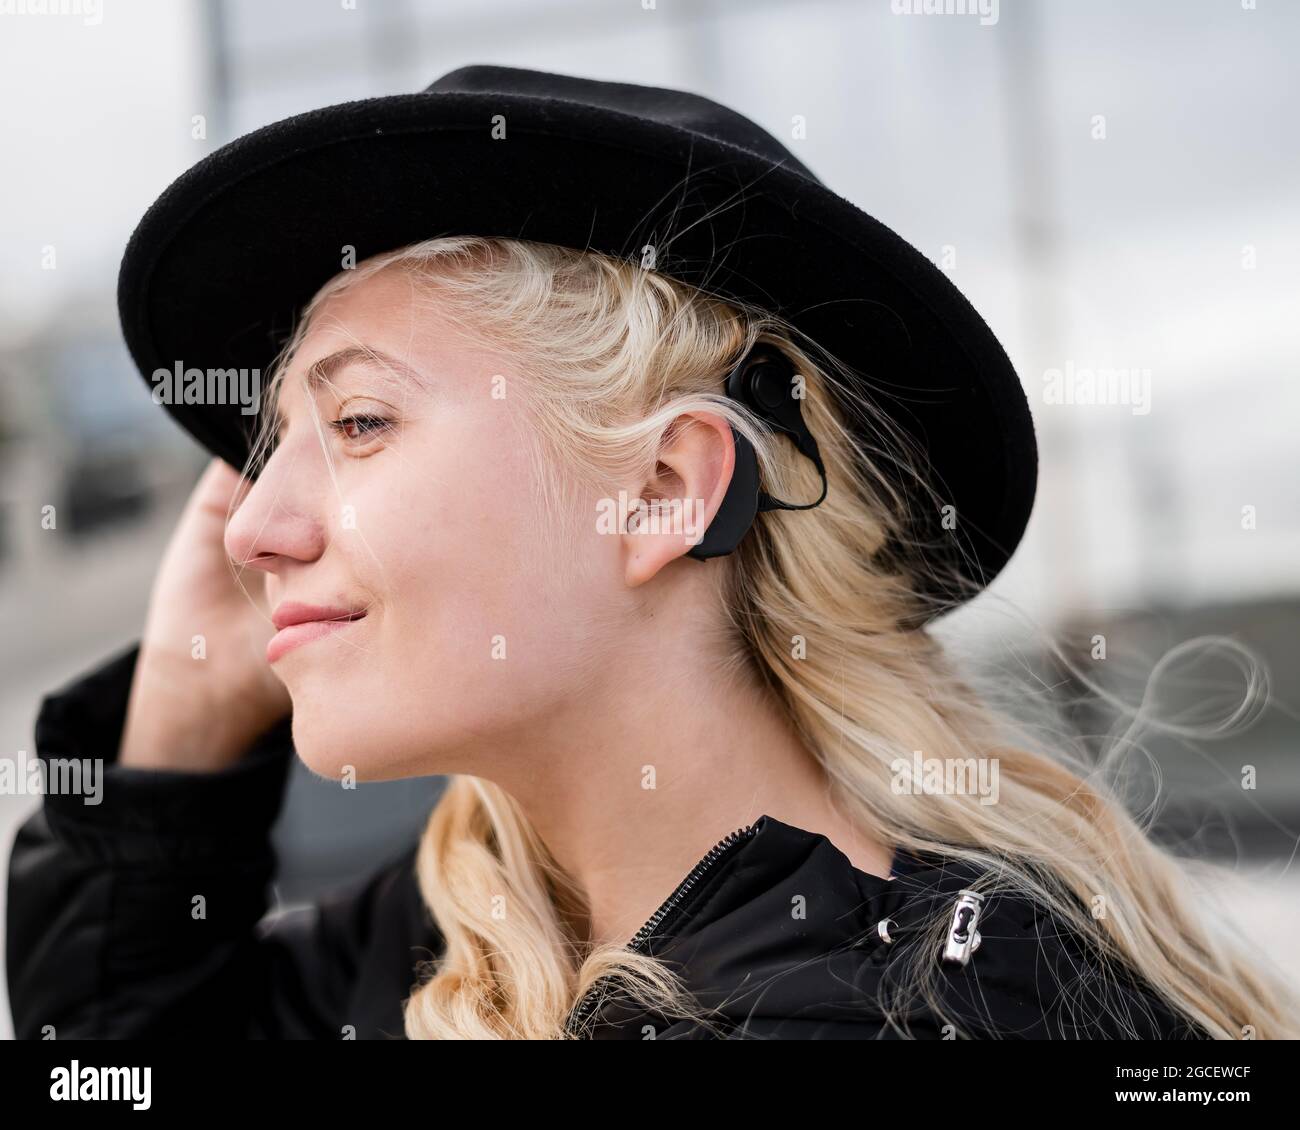 Portrait Of A Blonde Woman Wearing A Hearing Aid Stock Photo Alamy